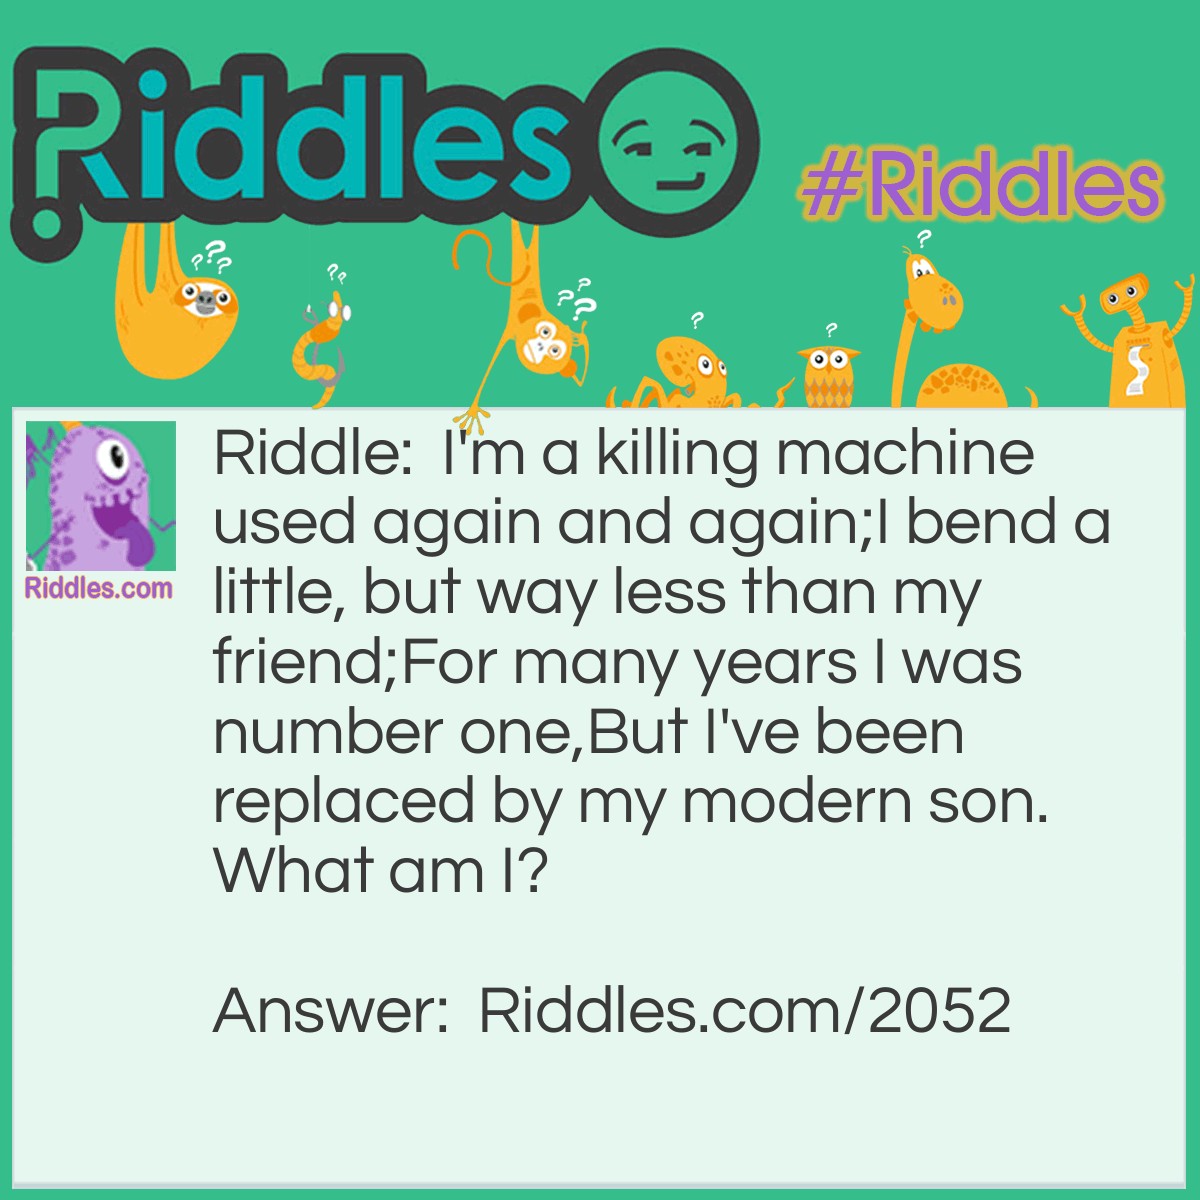 Riddle: I'm a killing machine used again and again;
I bend a little, but way less than my friend;
For many years I was number one,
But I've been replaced by my modern son.
What am I? Answer: An arrow